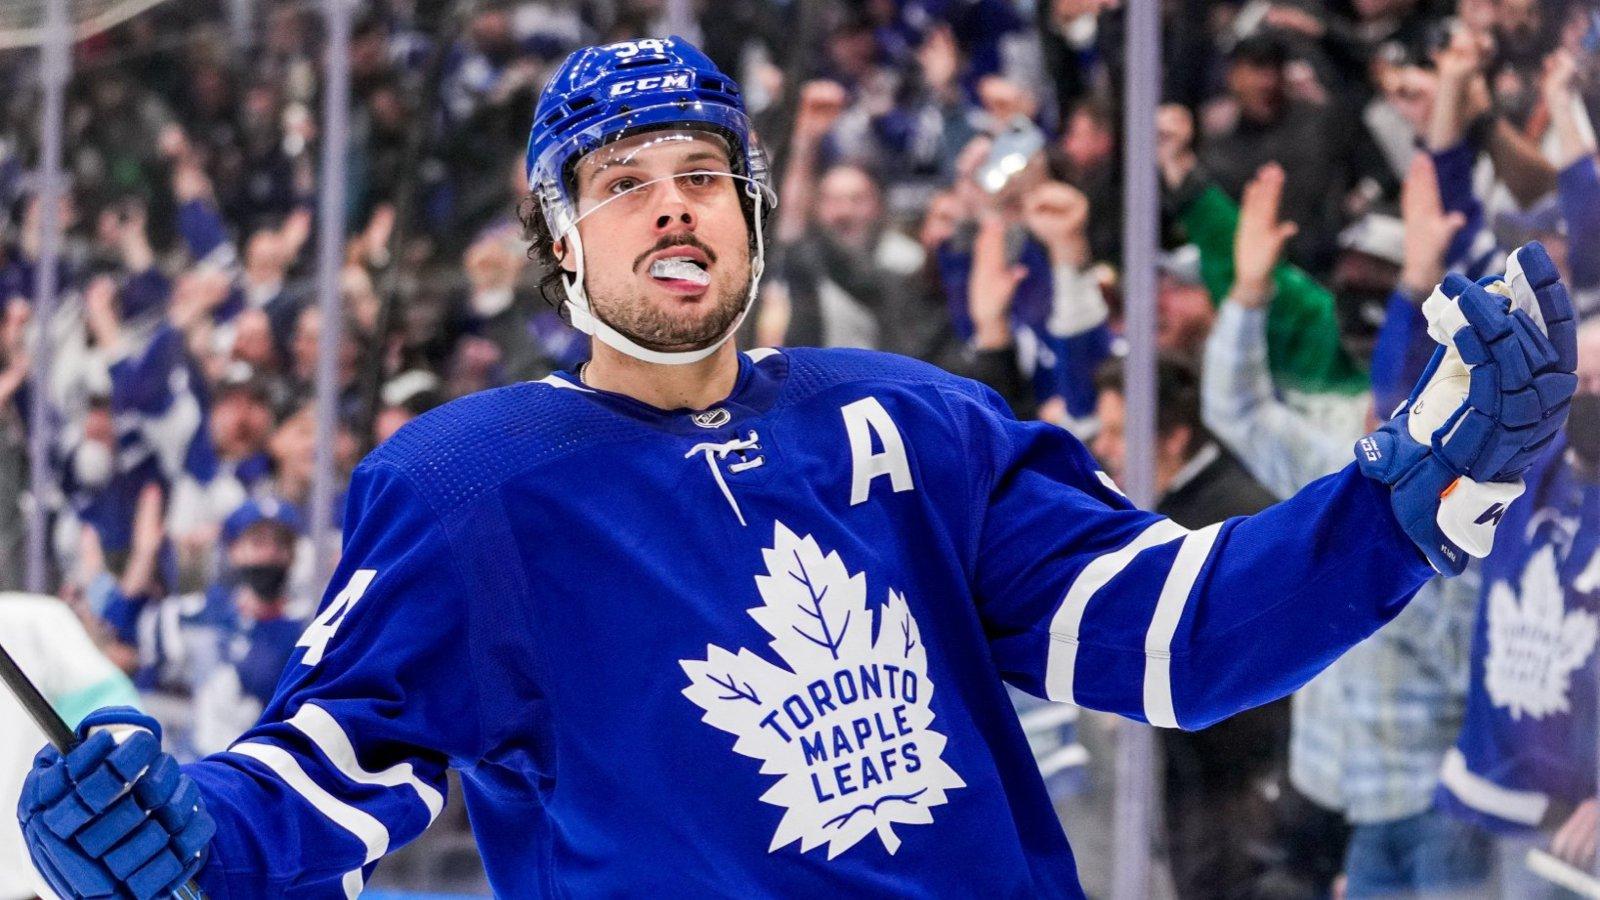 Bruins vs Maple Leafs prediction & best NHL picks today